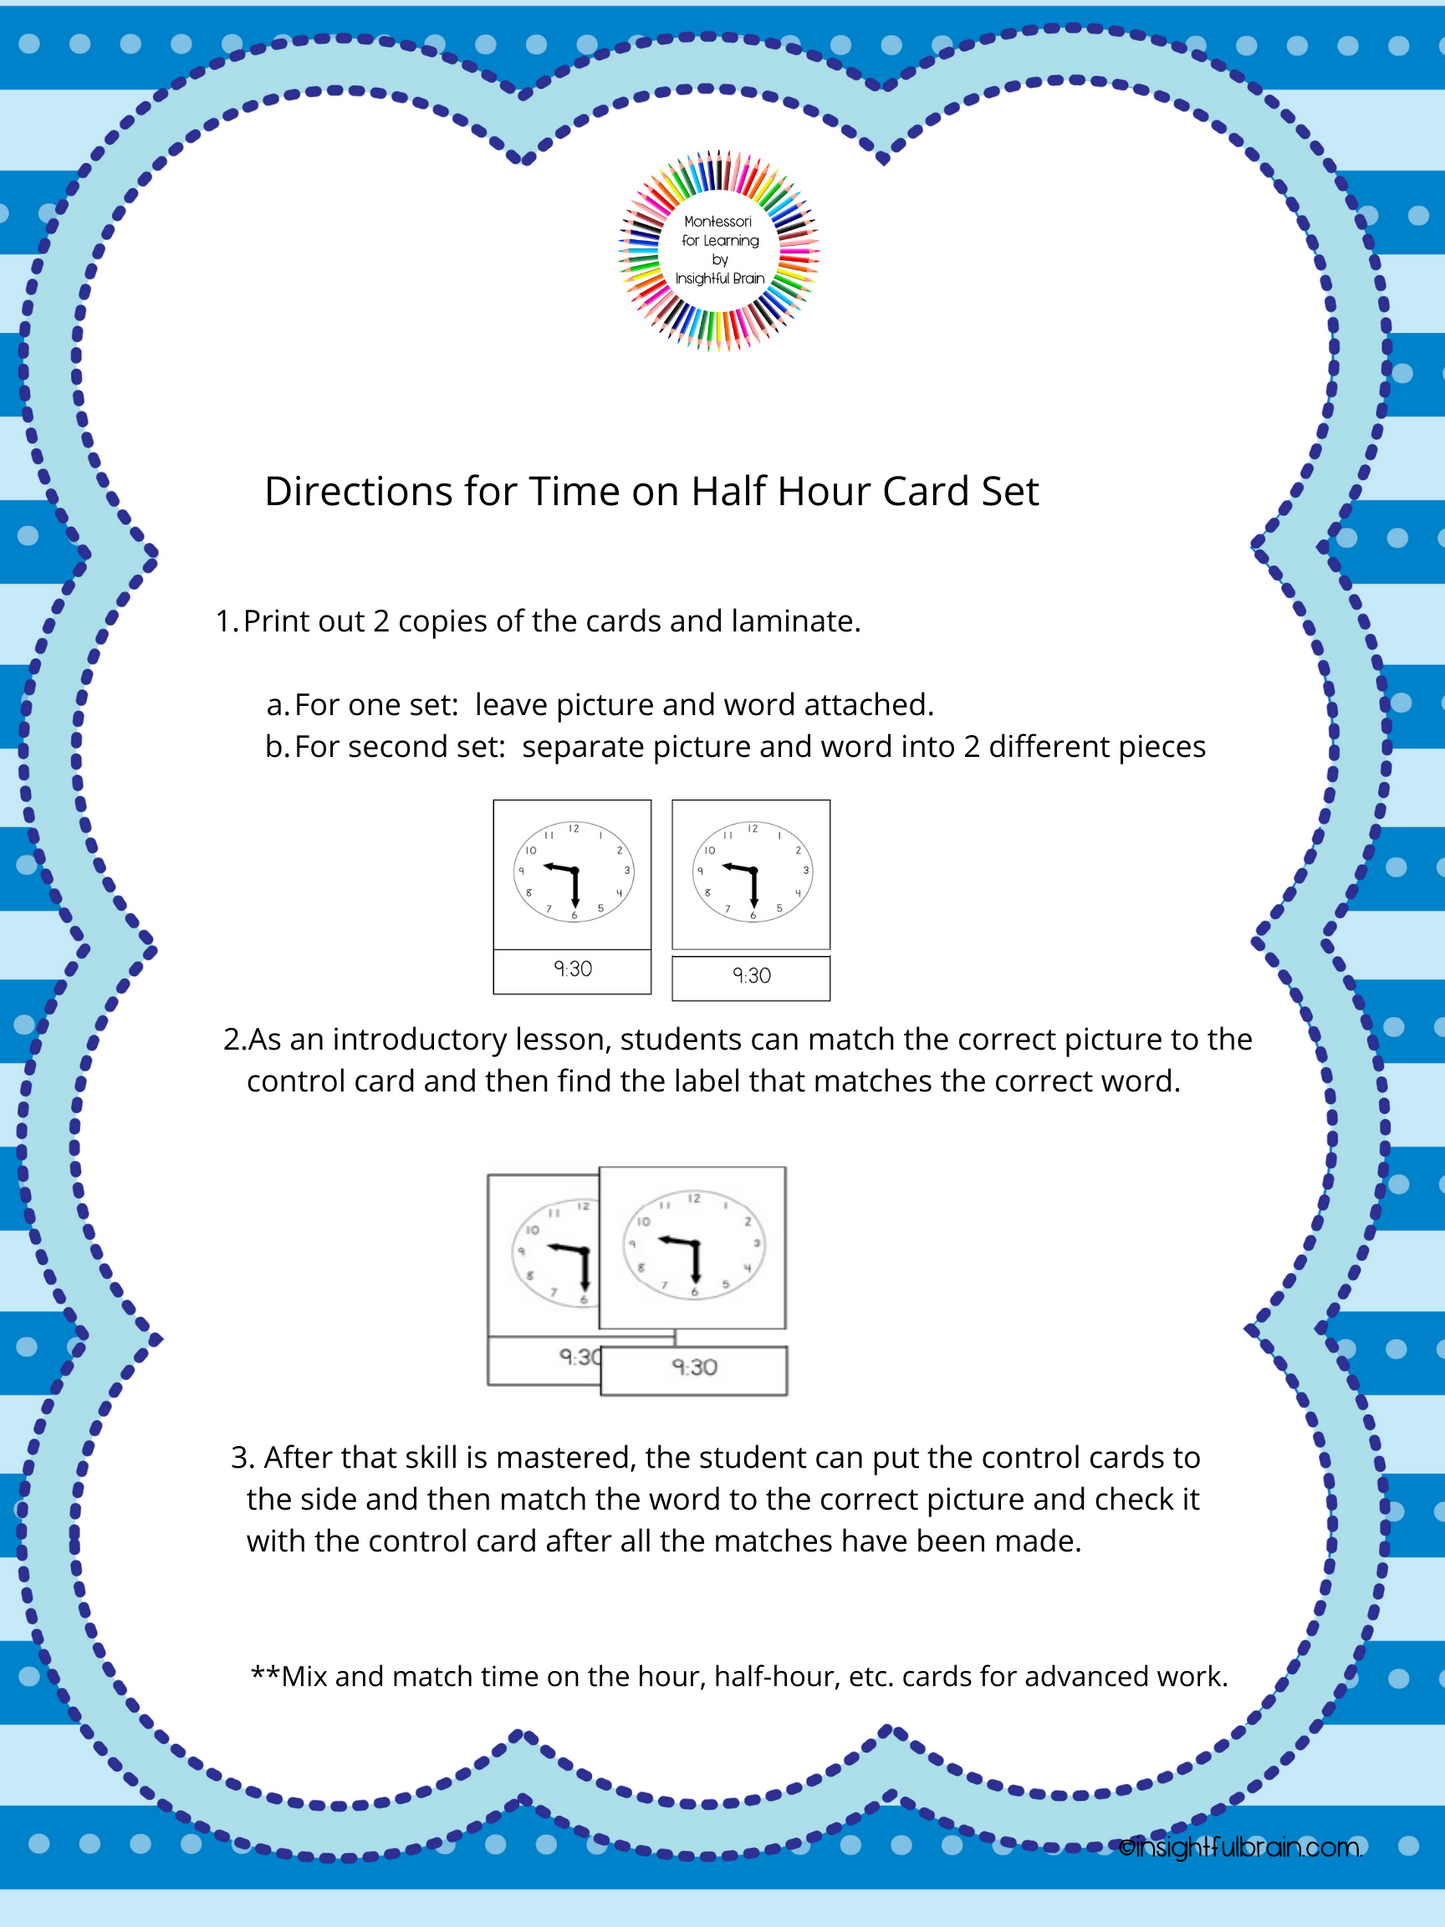 Time on the Half Hour Card Set